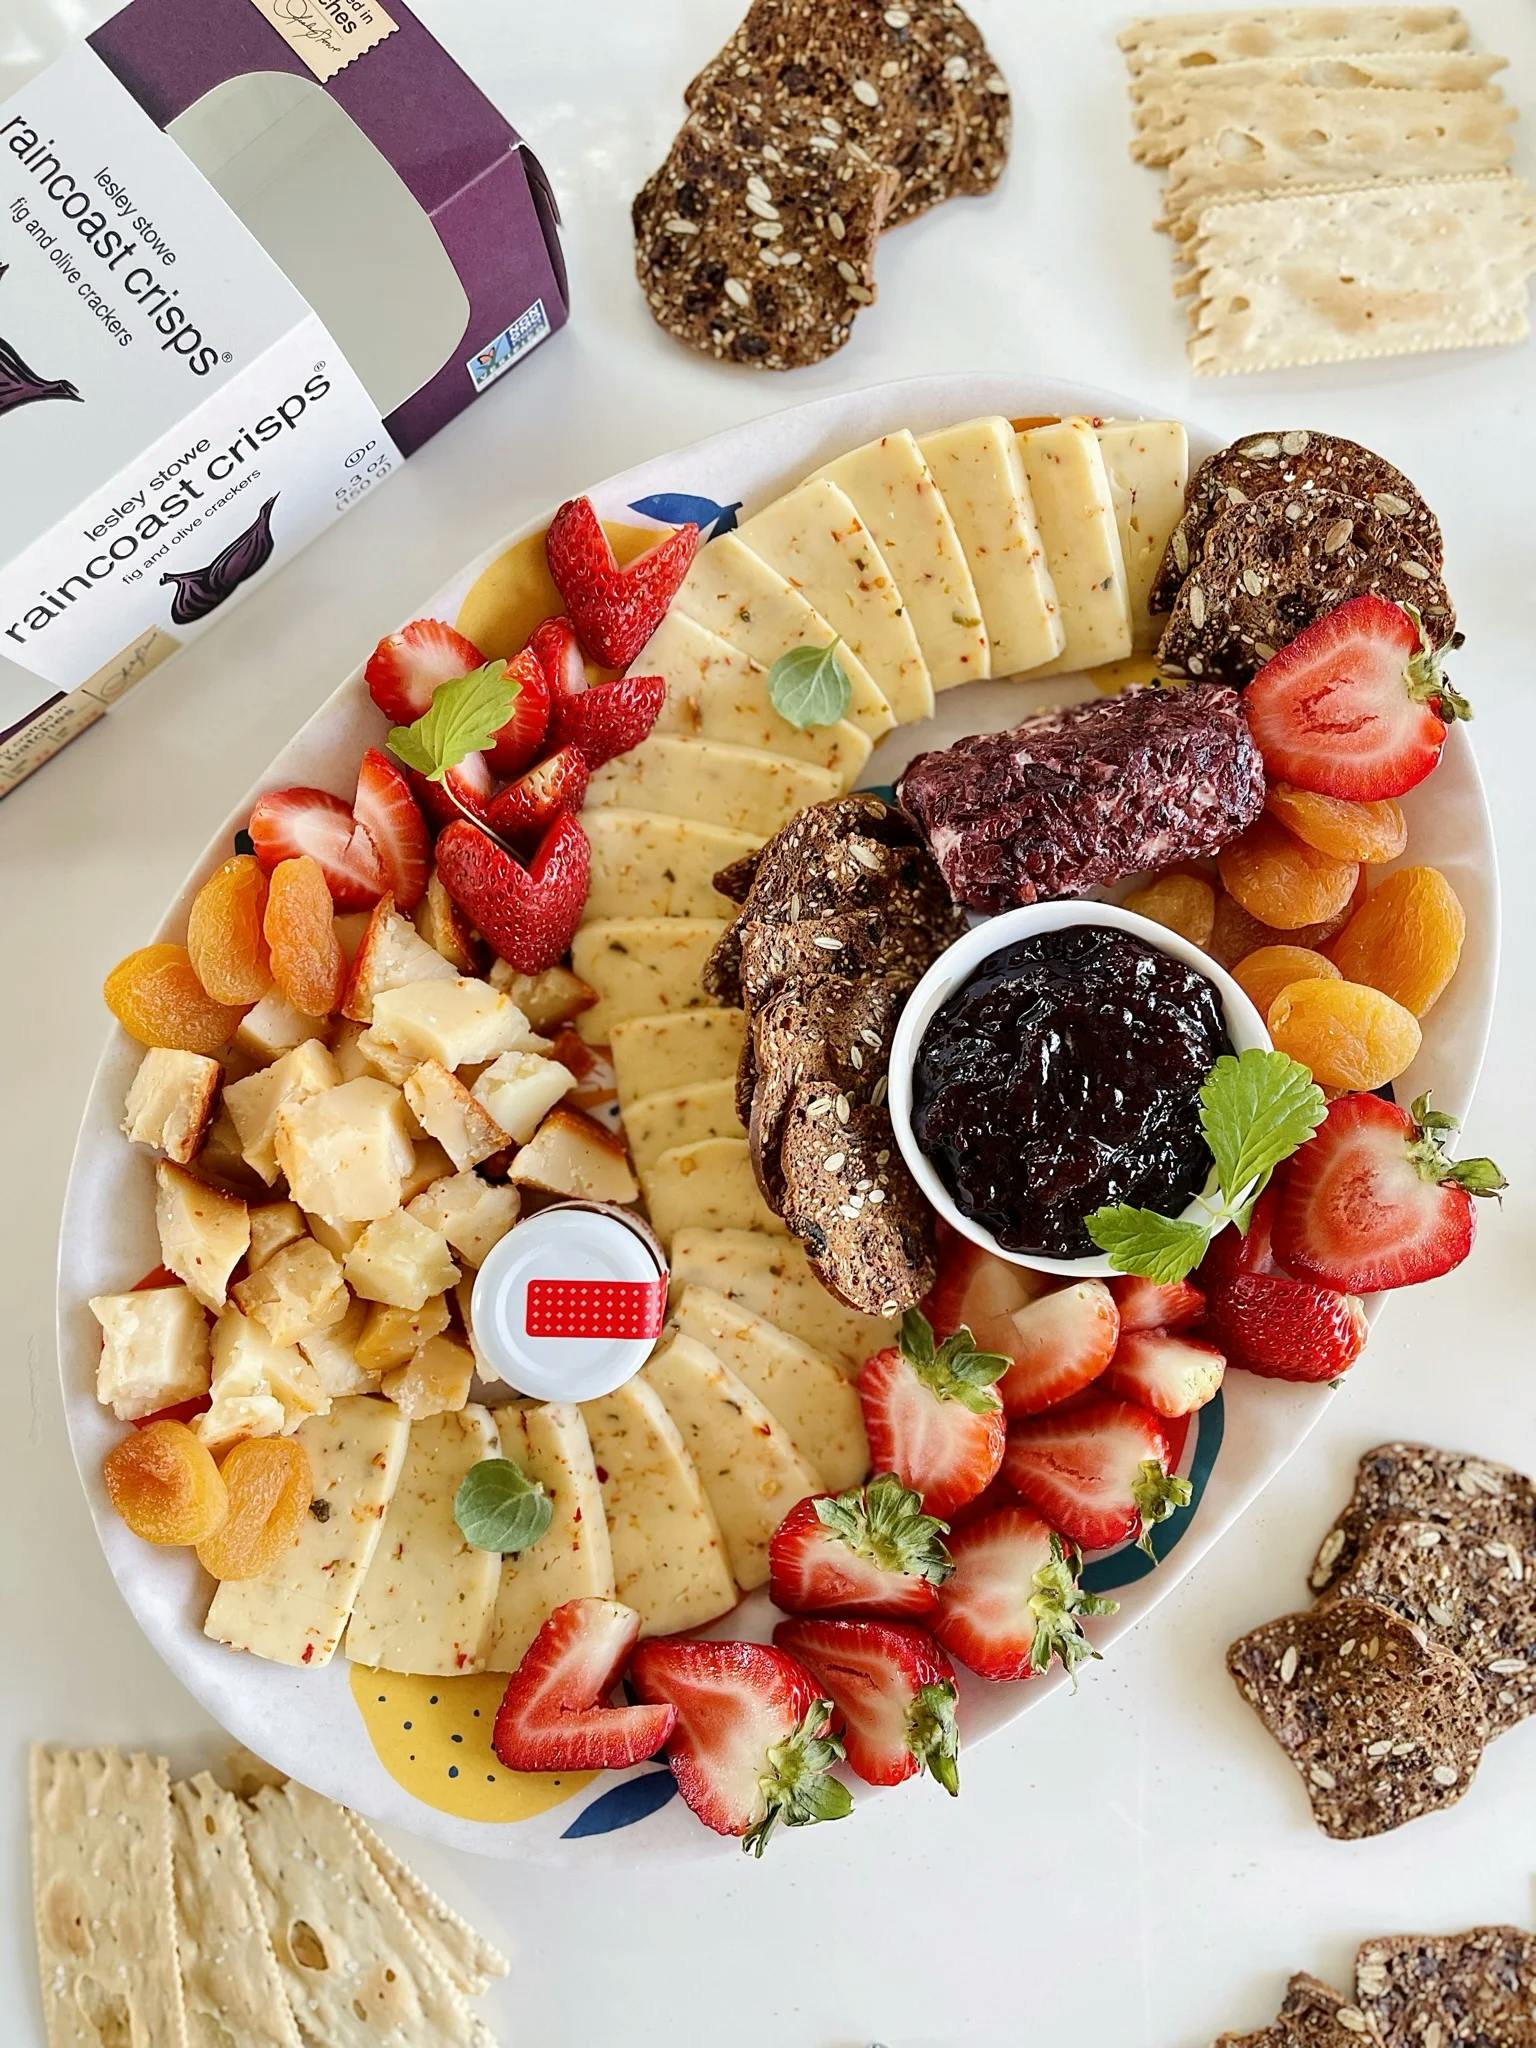 Picture for 3 Cheese & Crackers Plate